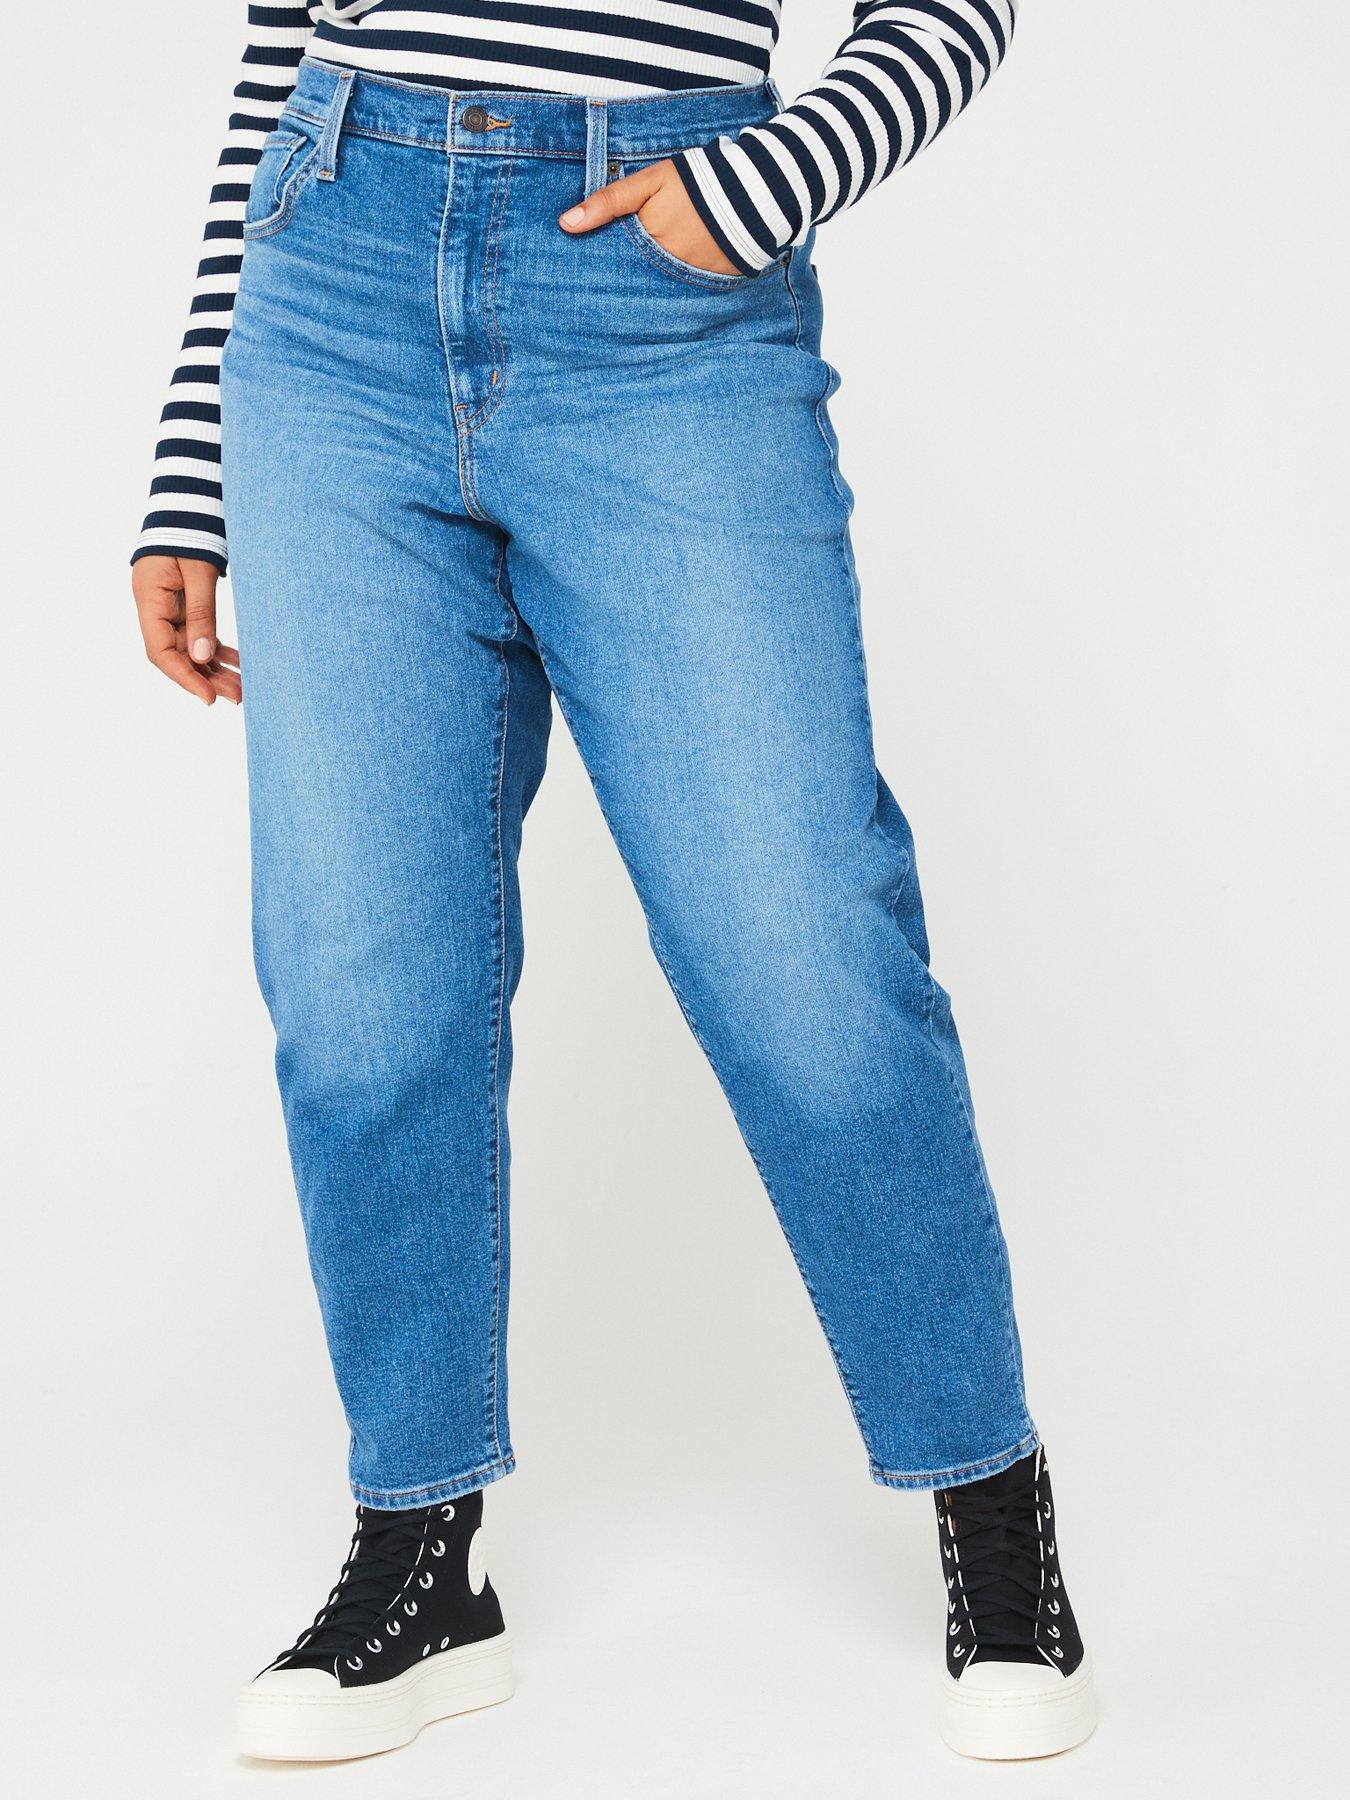 Levi's Original Red Tab Women's High-Waisted Mom Jeans 